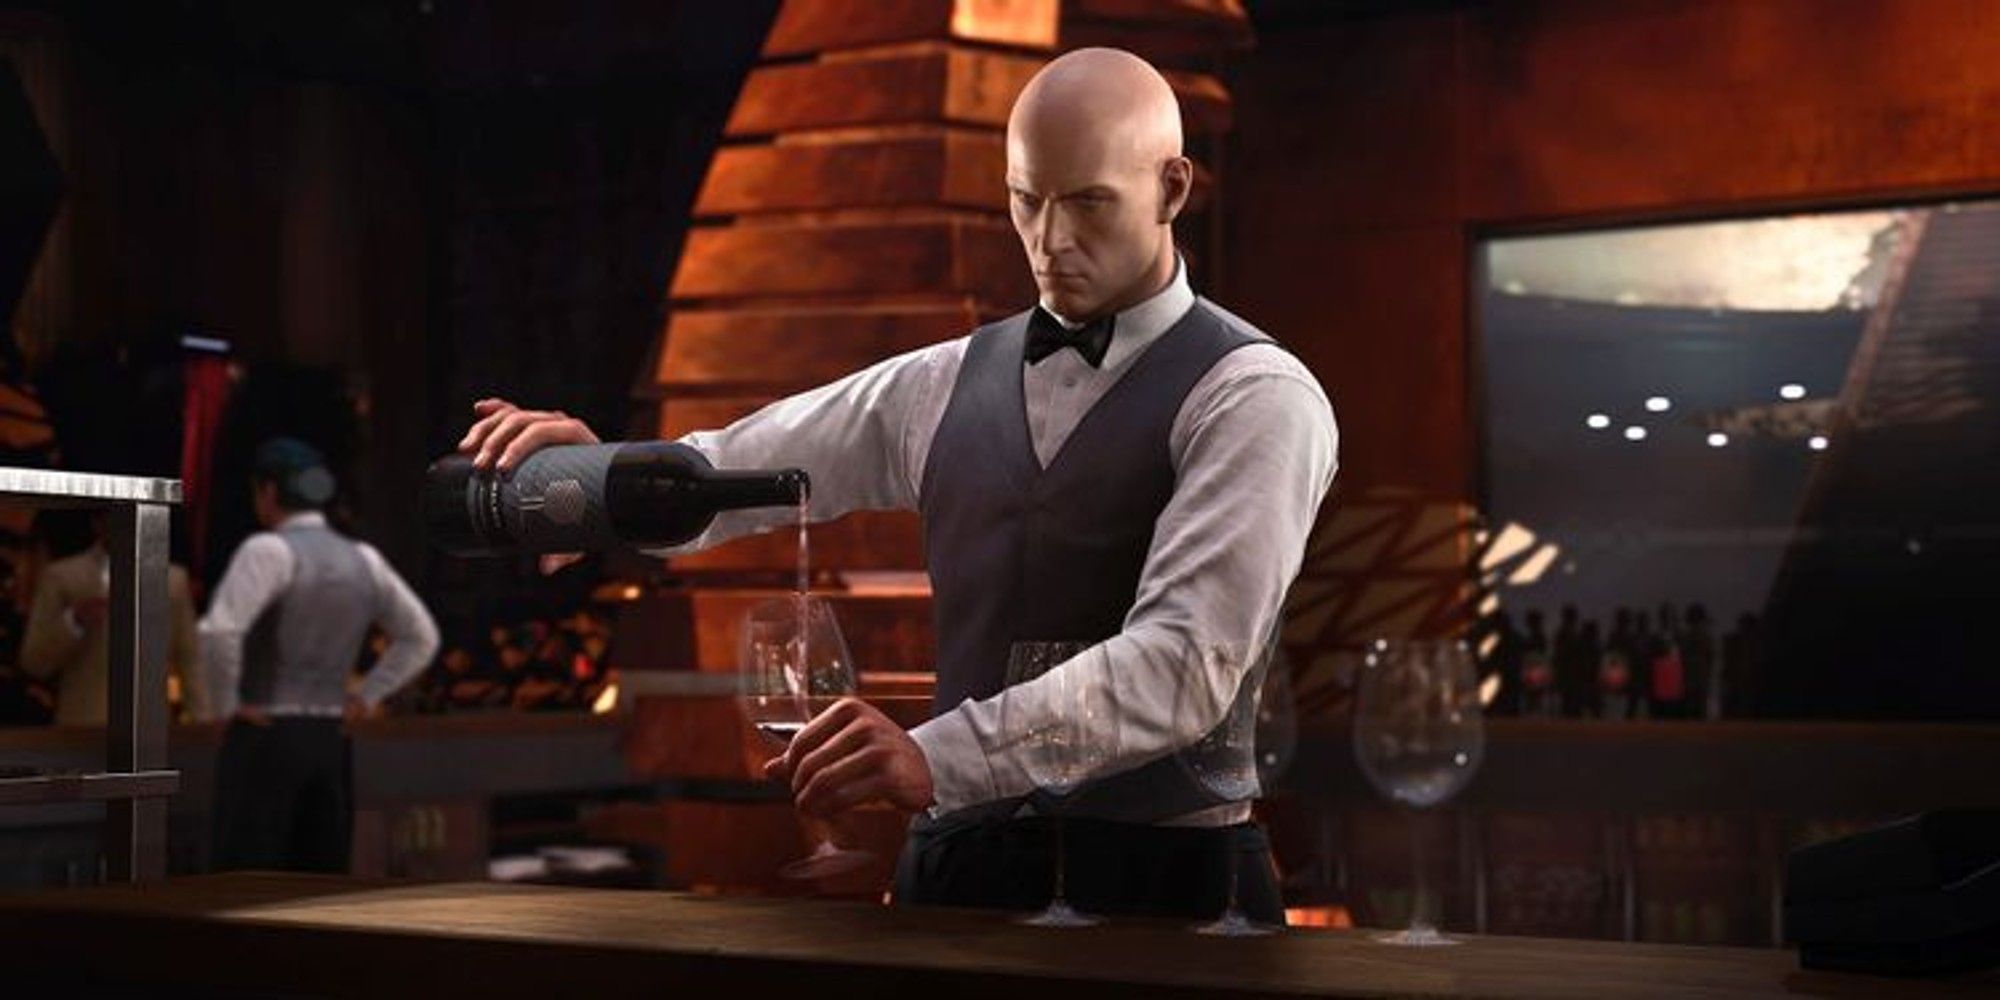 hitman 3 agent 47 pouring drink waiter